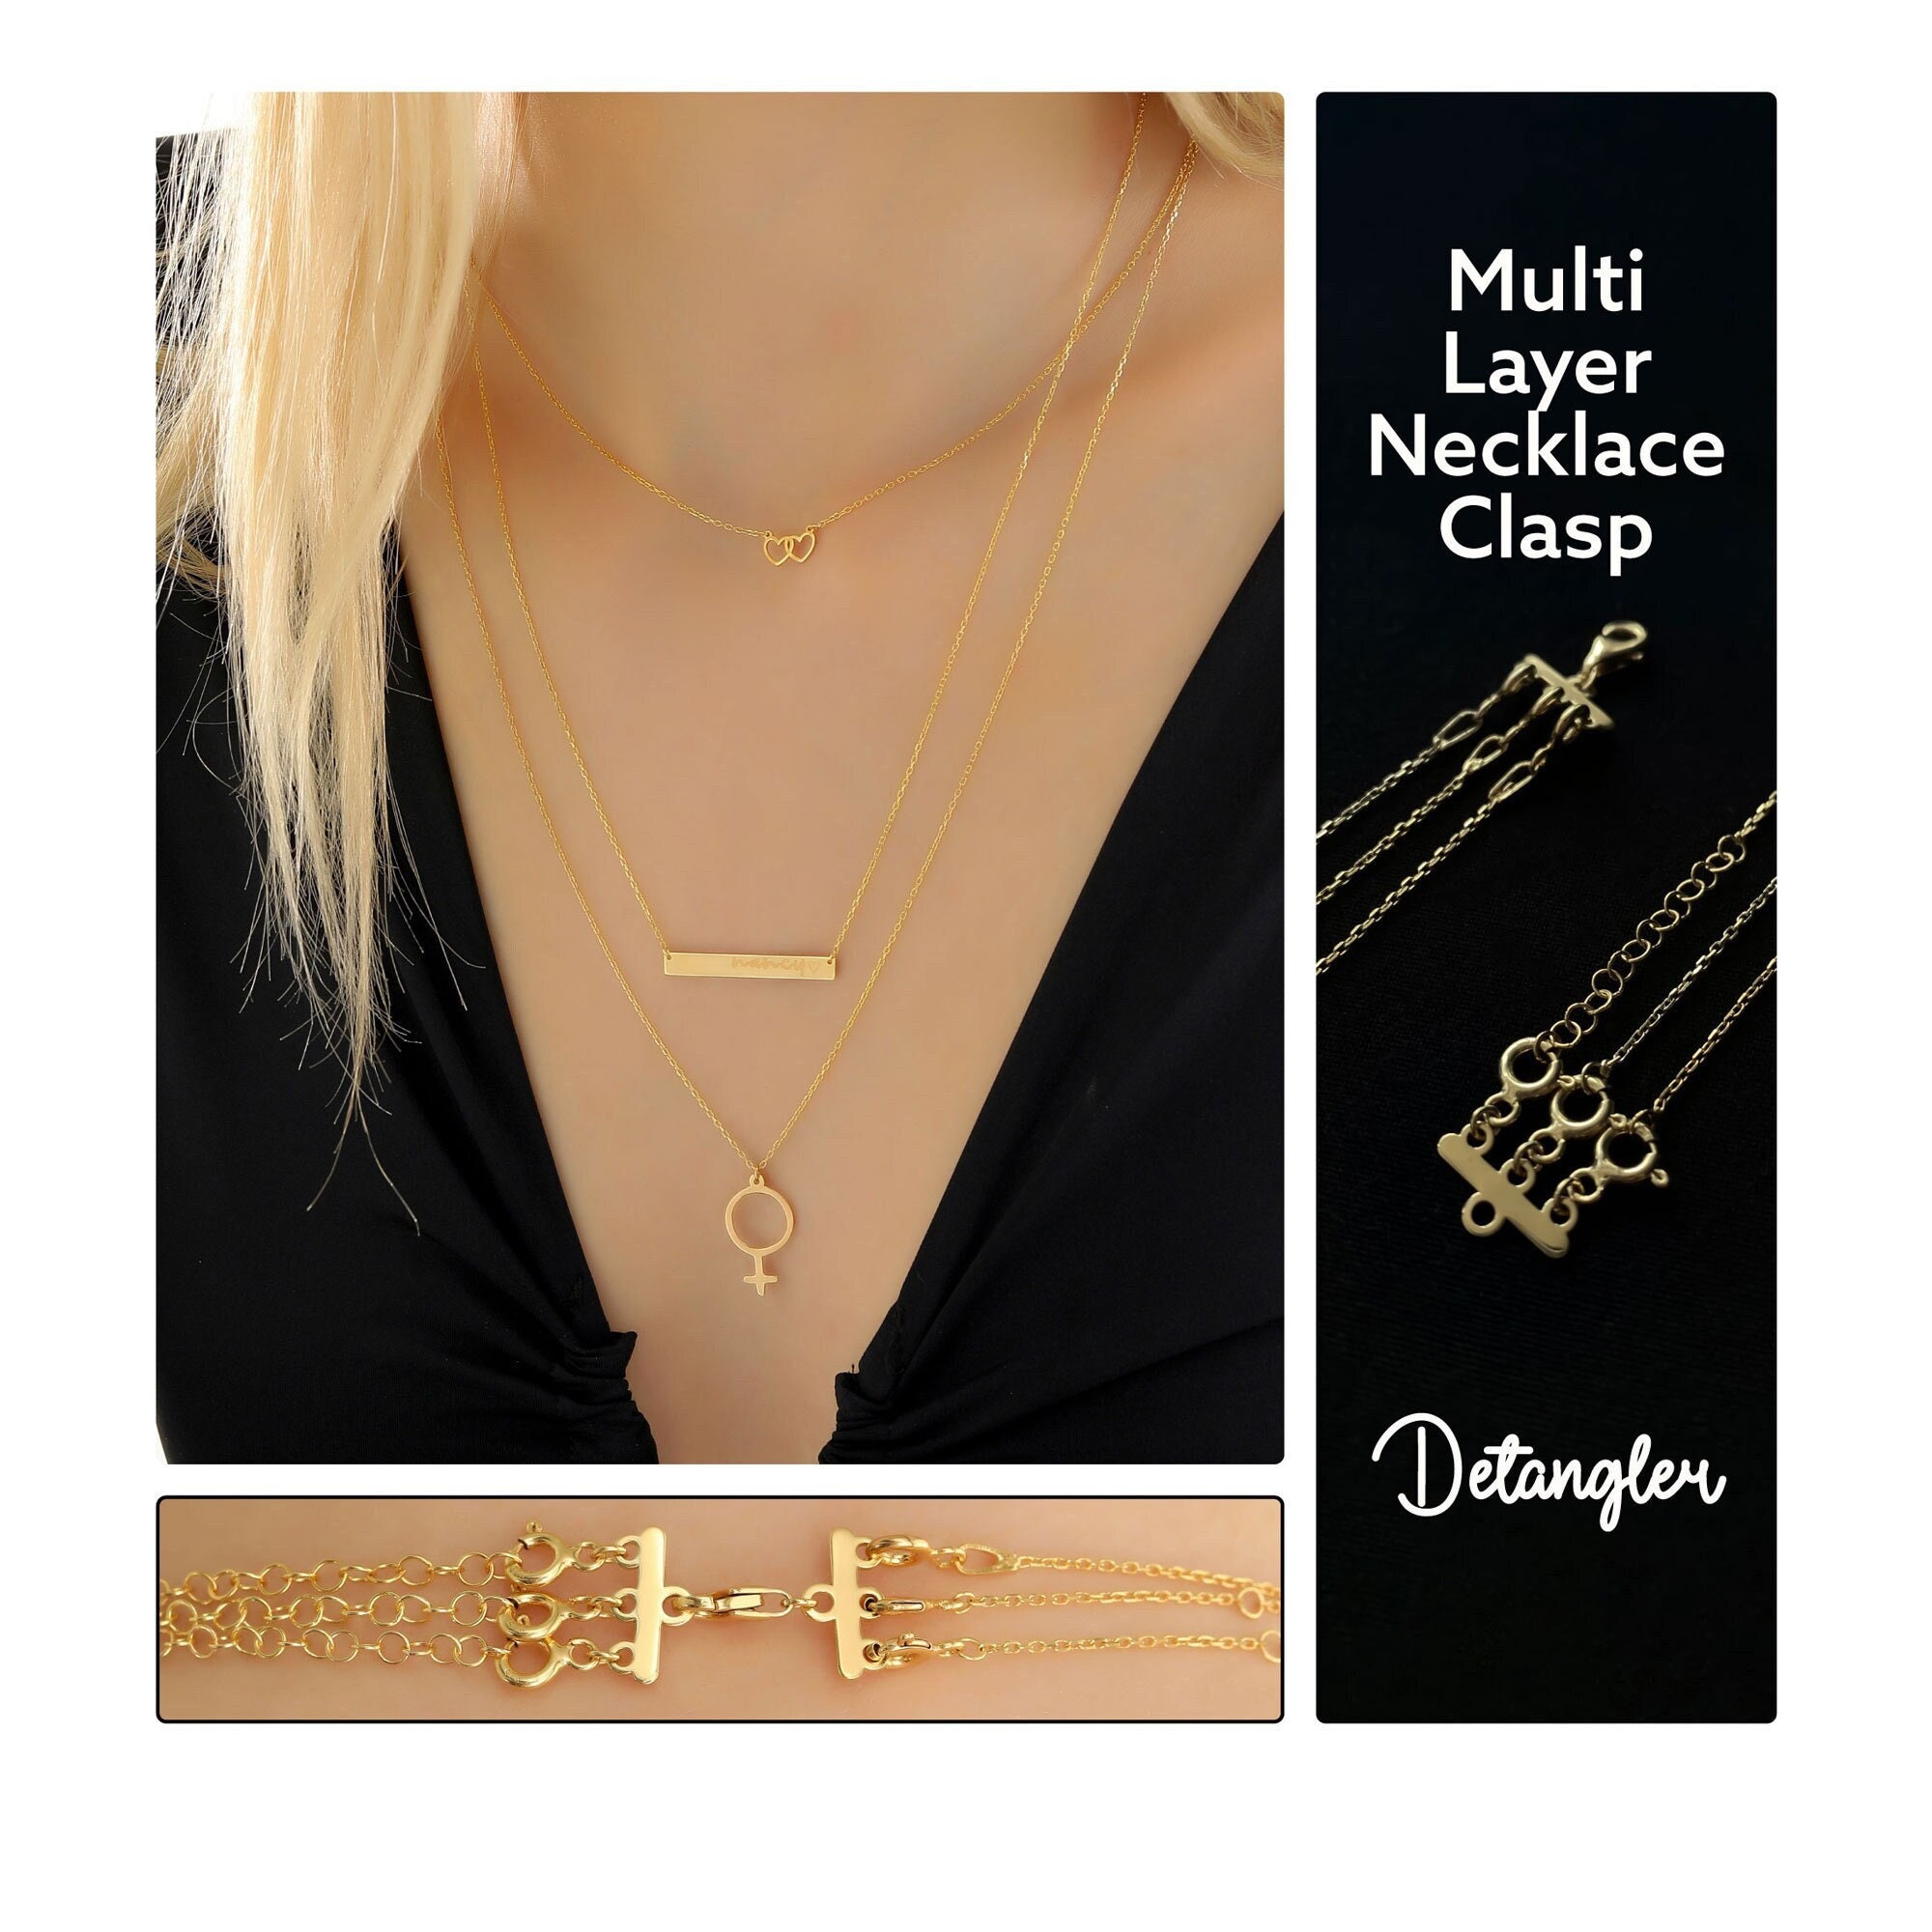 Buy Infinity Clips Necklace Shortener for Thin Chains 18K Gold Plated Brass  Necklace Shortener Clasp with Cubic Zirconia Accents at